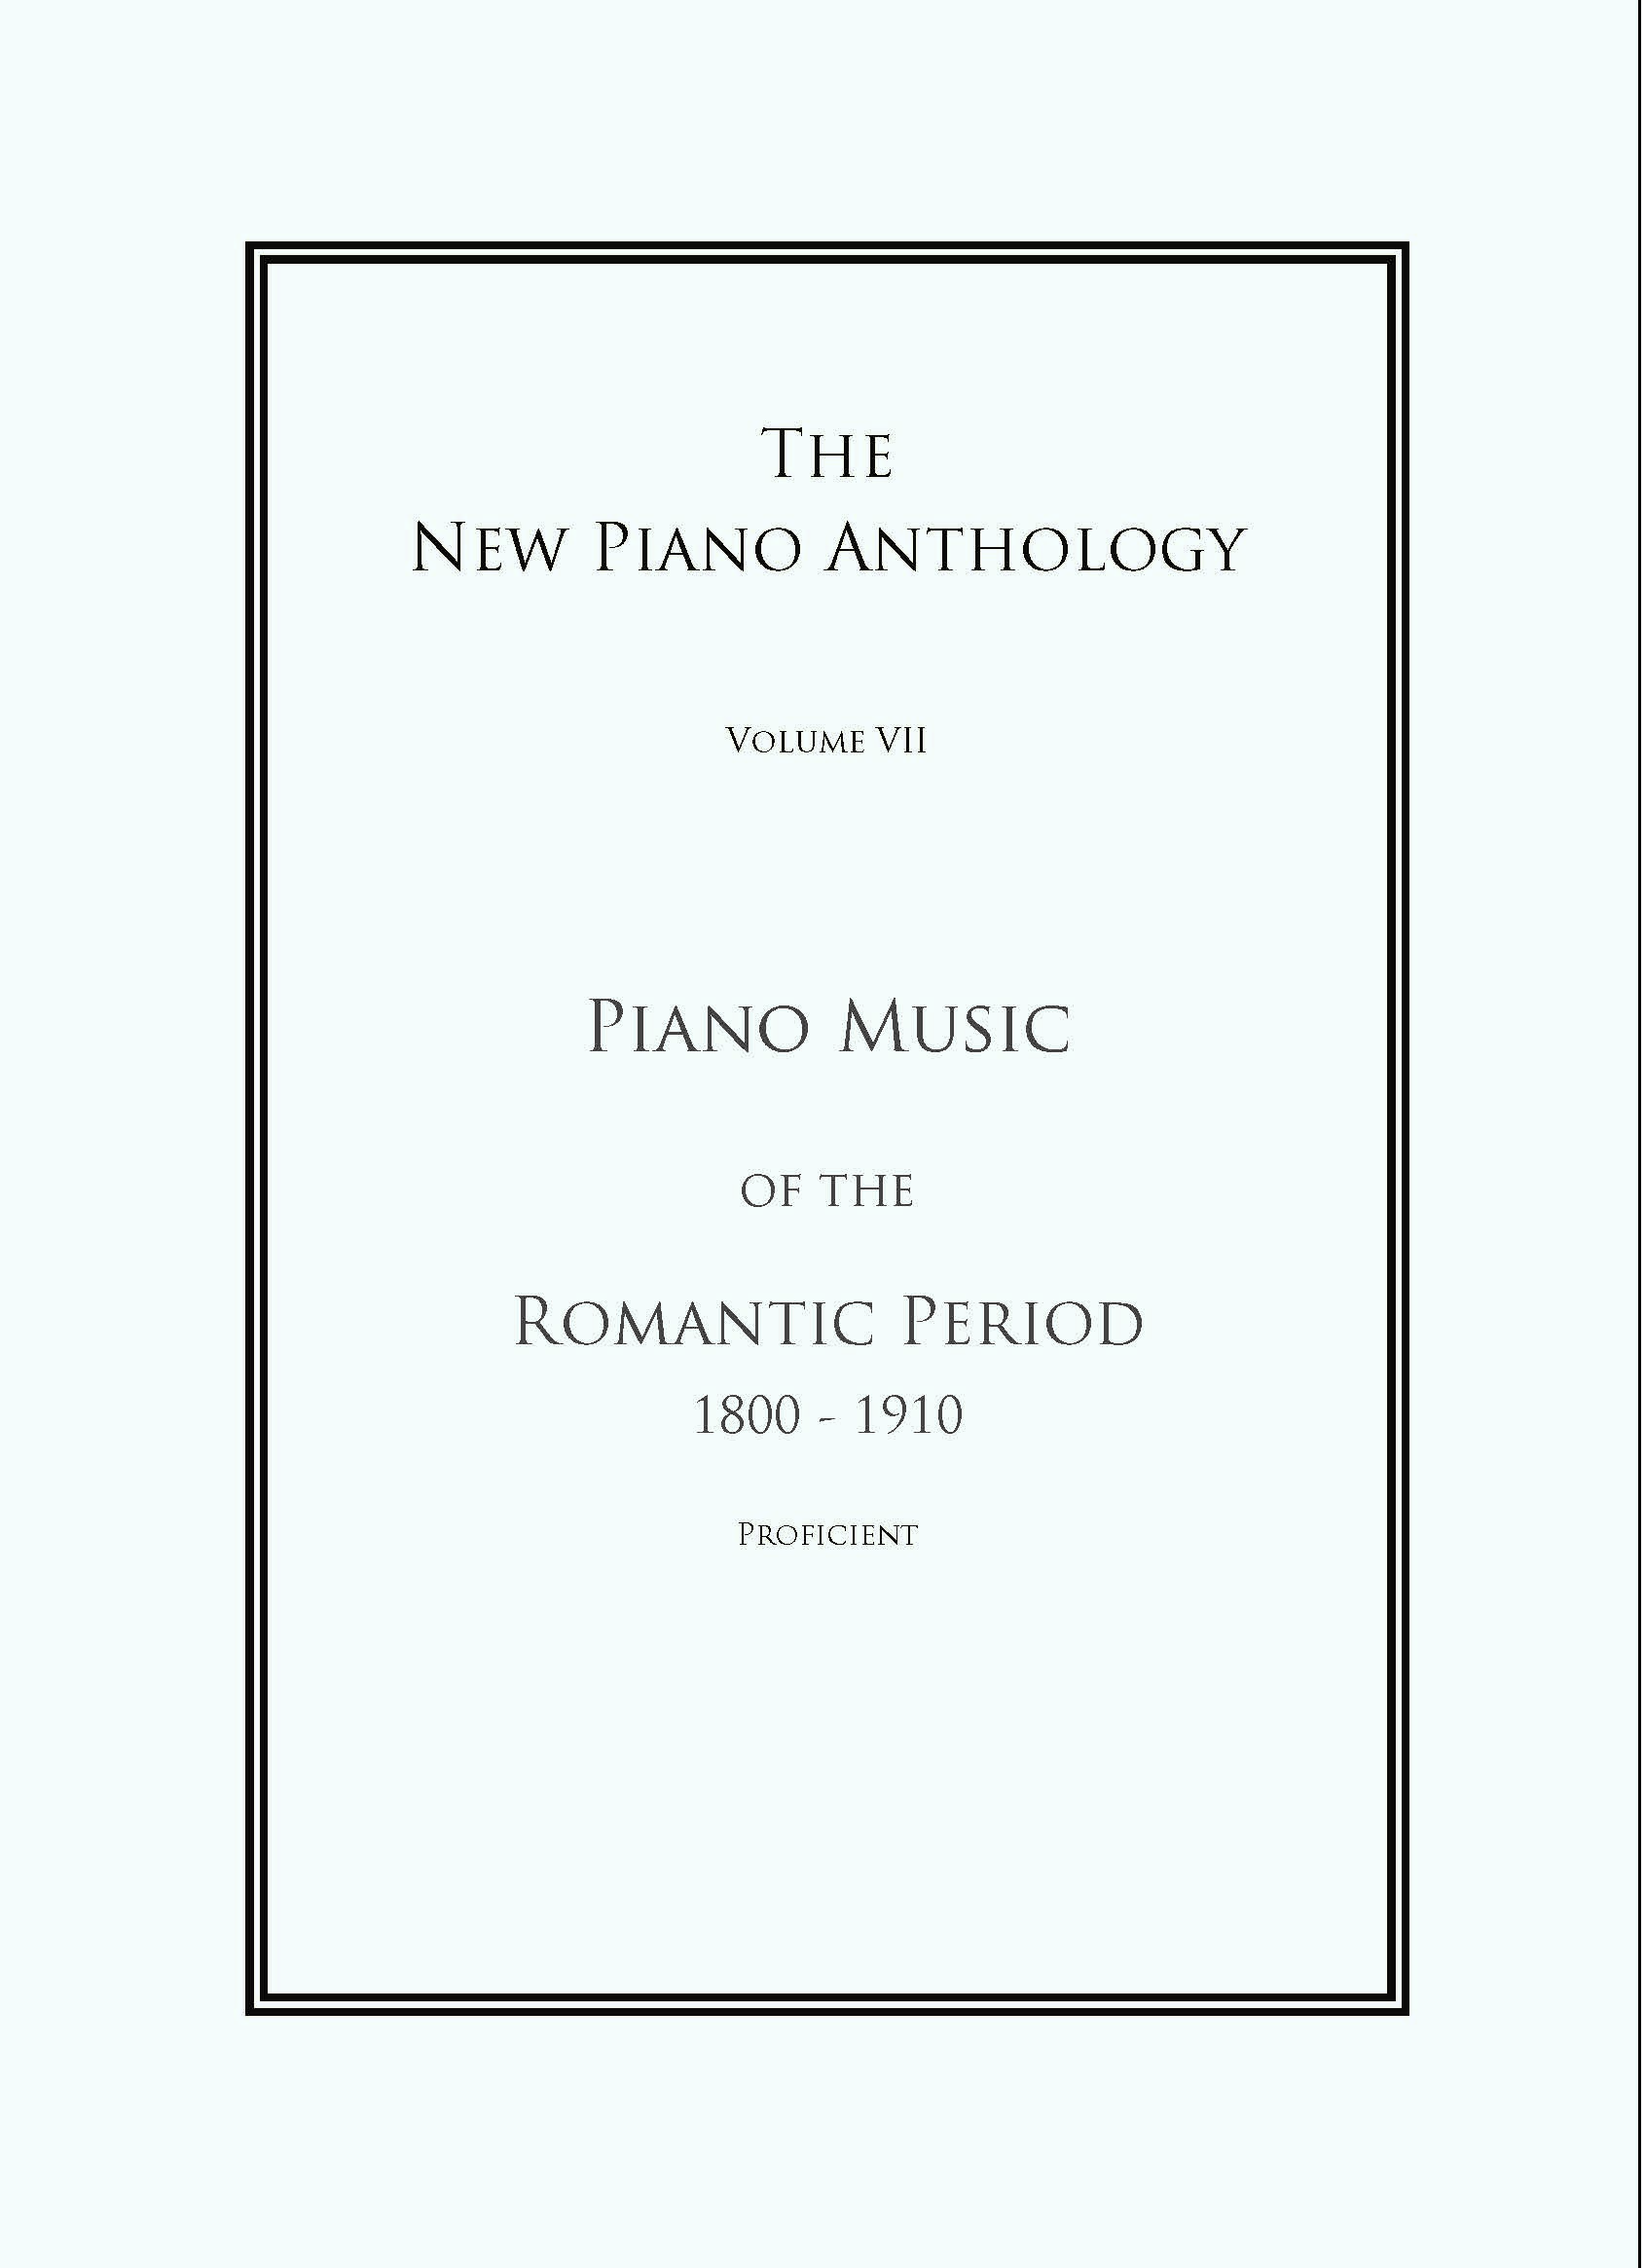 Keyboard Music from the Romantic Period (Proficient)